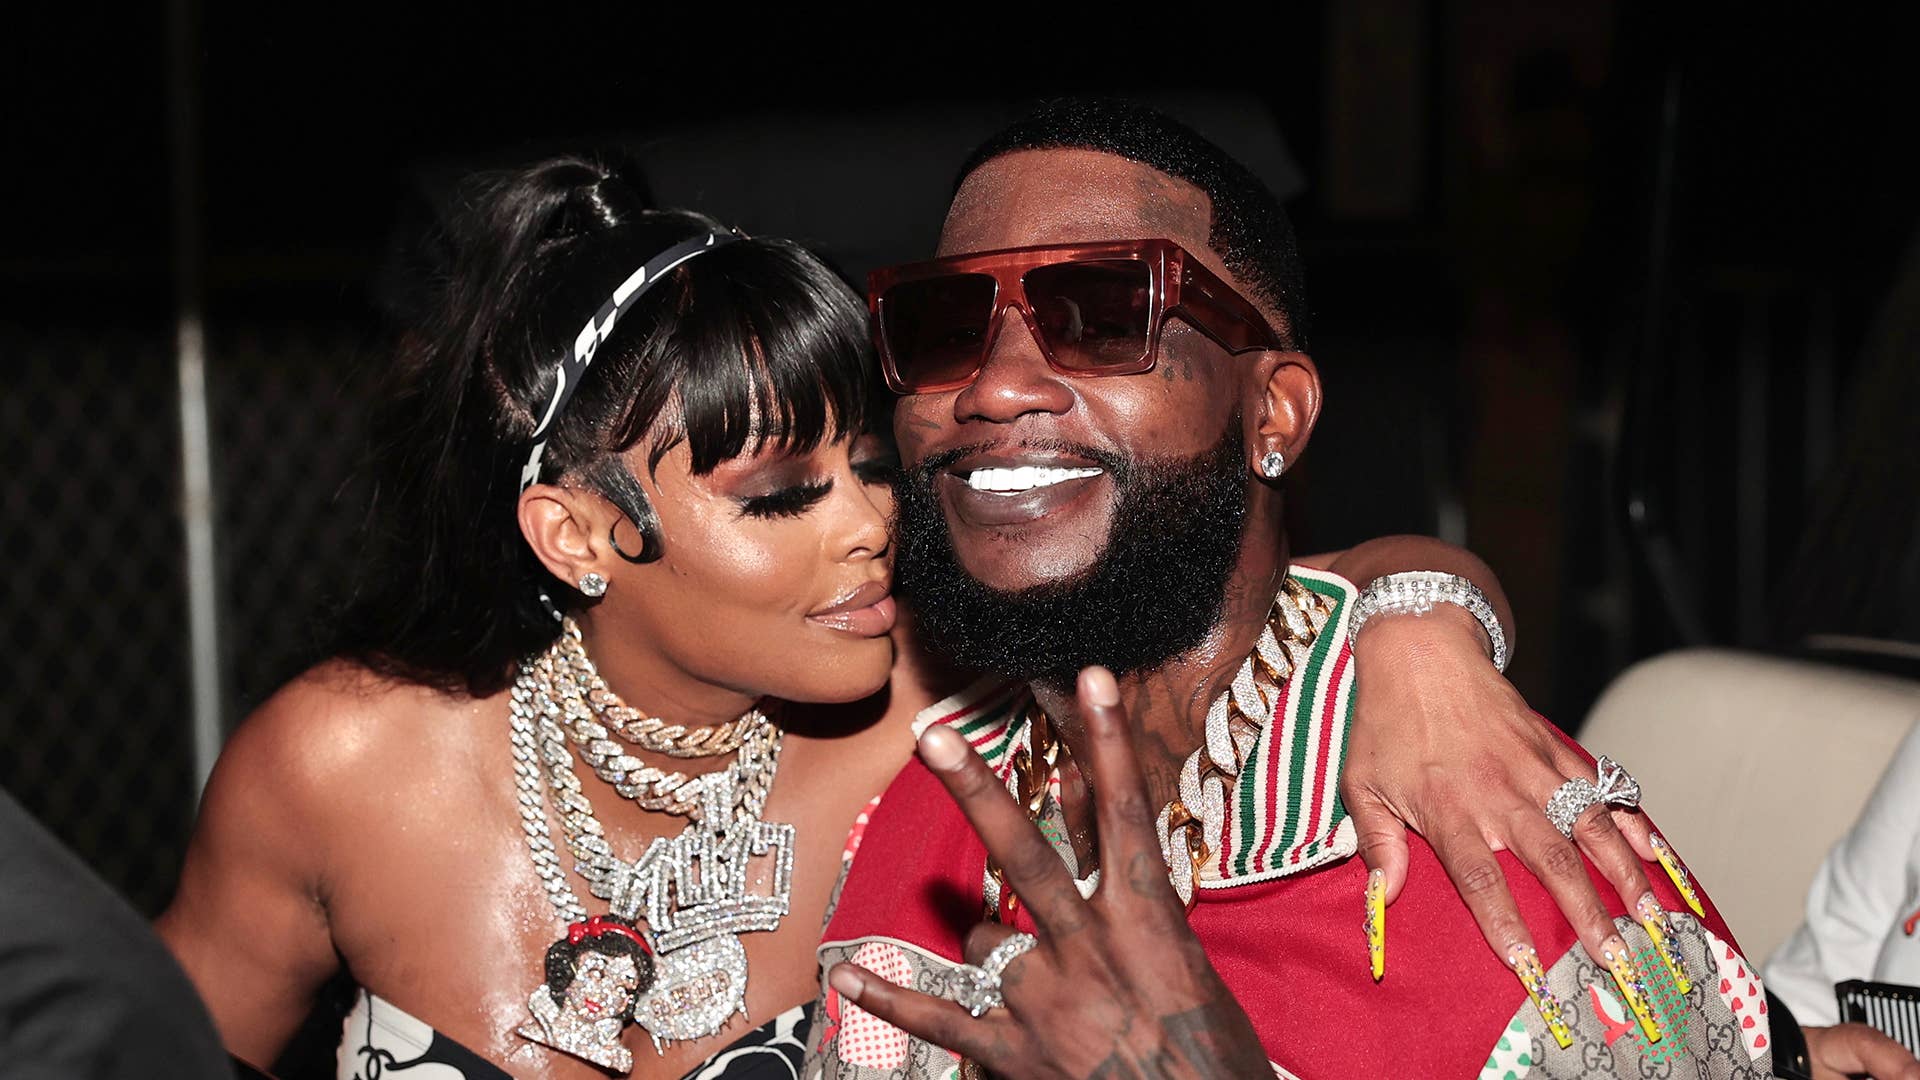 So Icy! All Of the Details From Gucci Mane and Keyshia Ka'Oir's